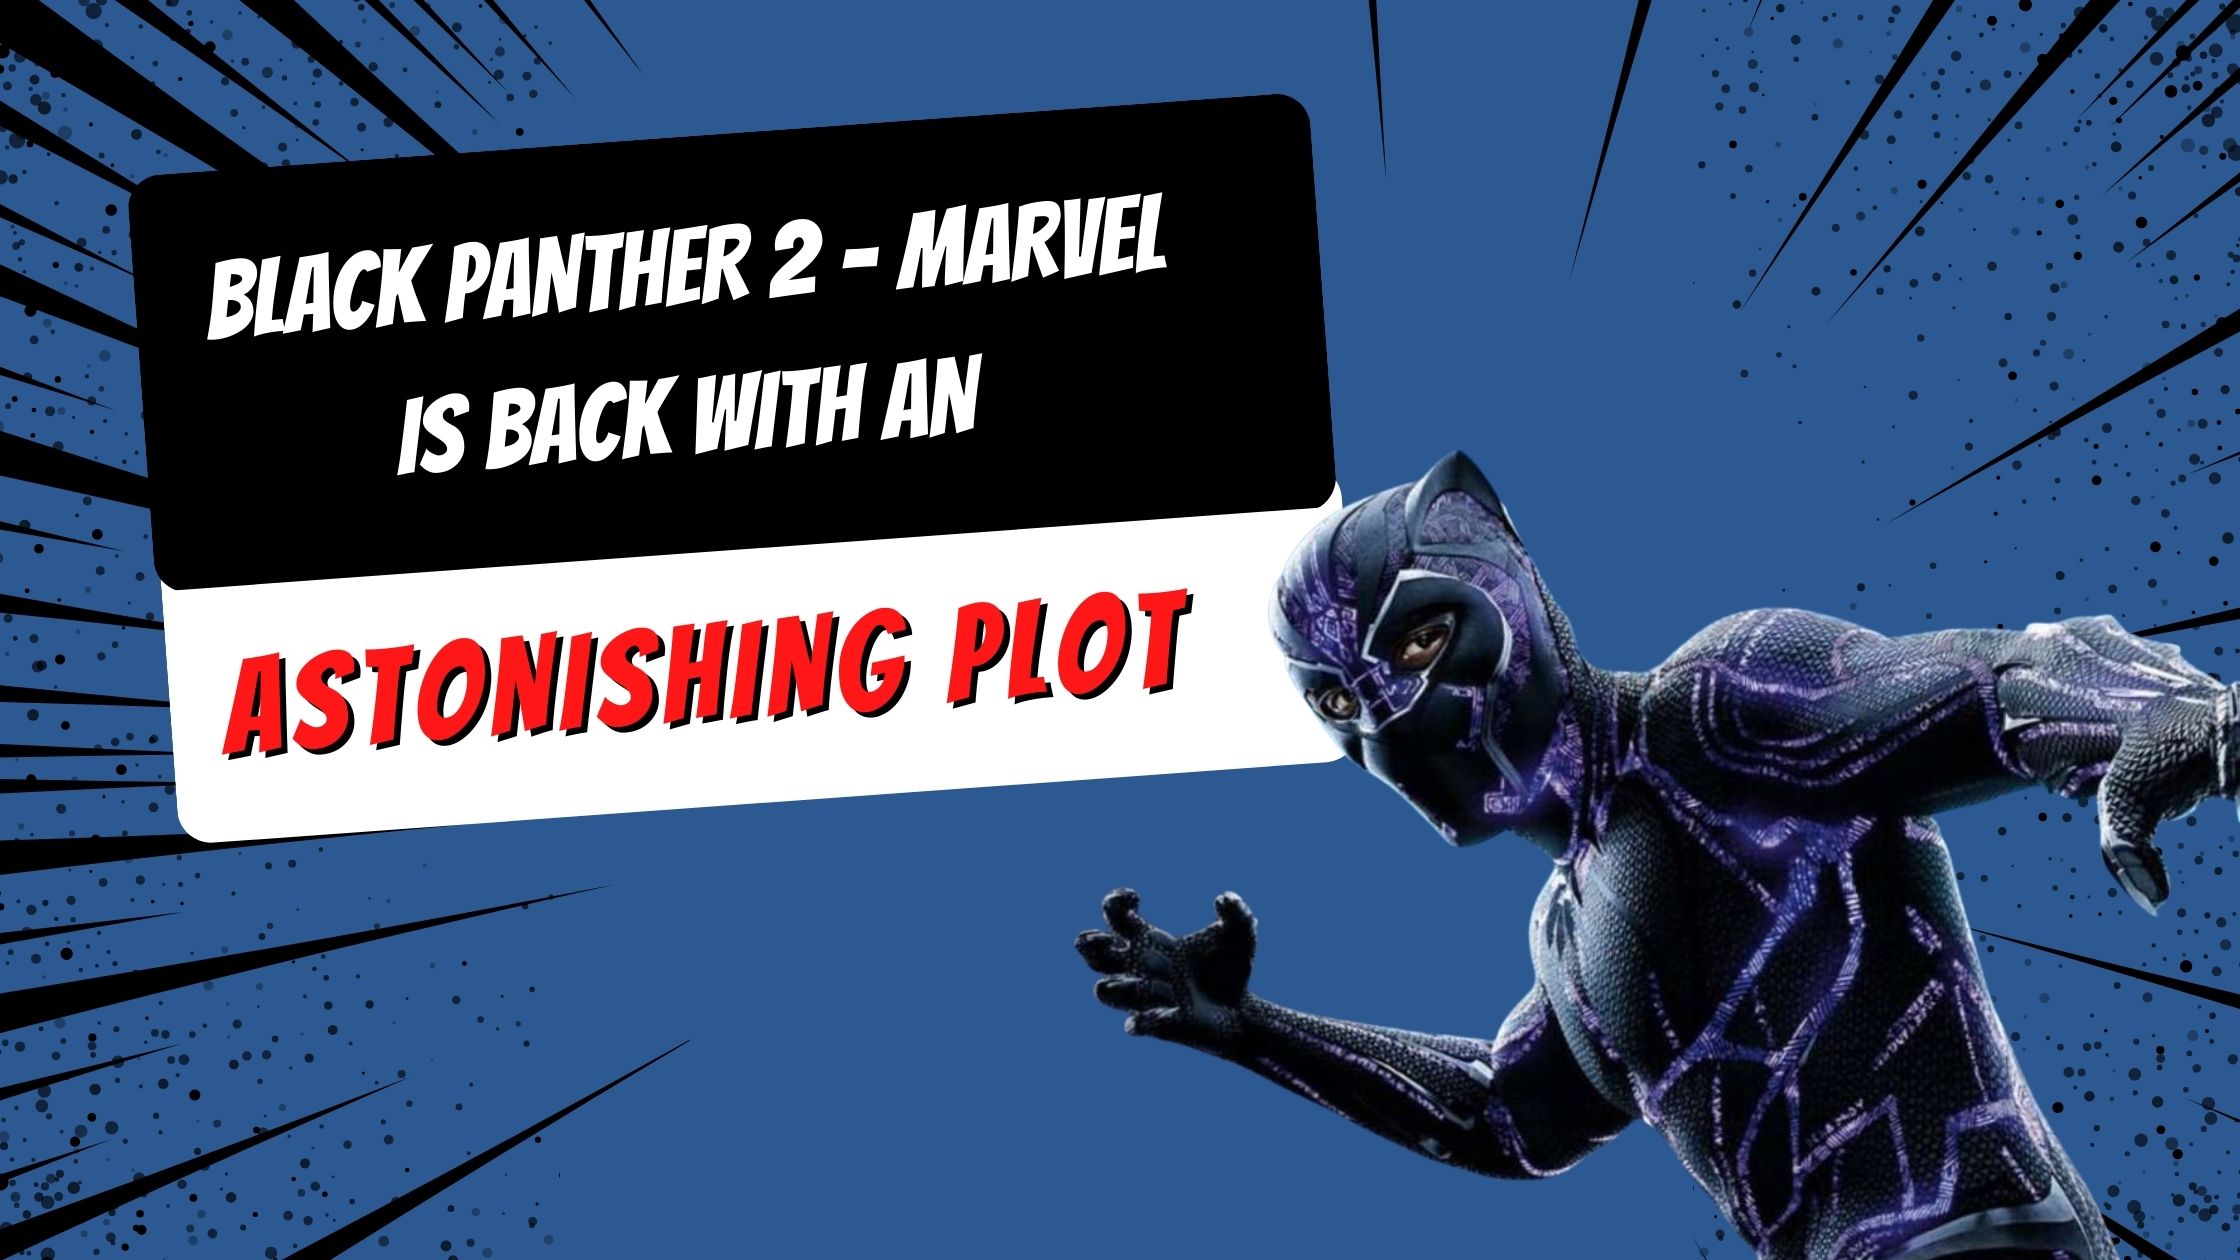 Black Panther 2 – Marvel is back with an astonishing plot